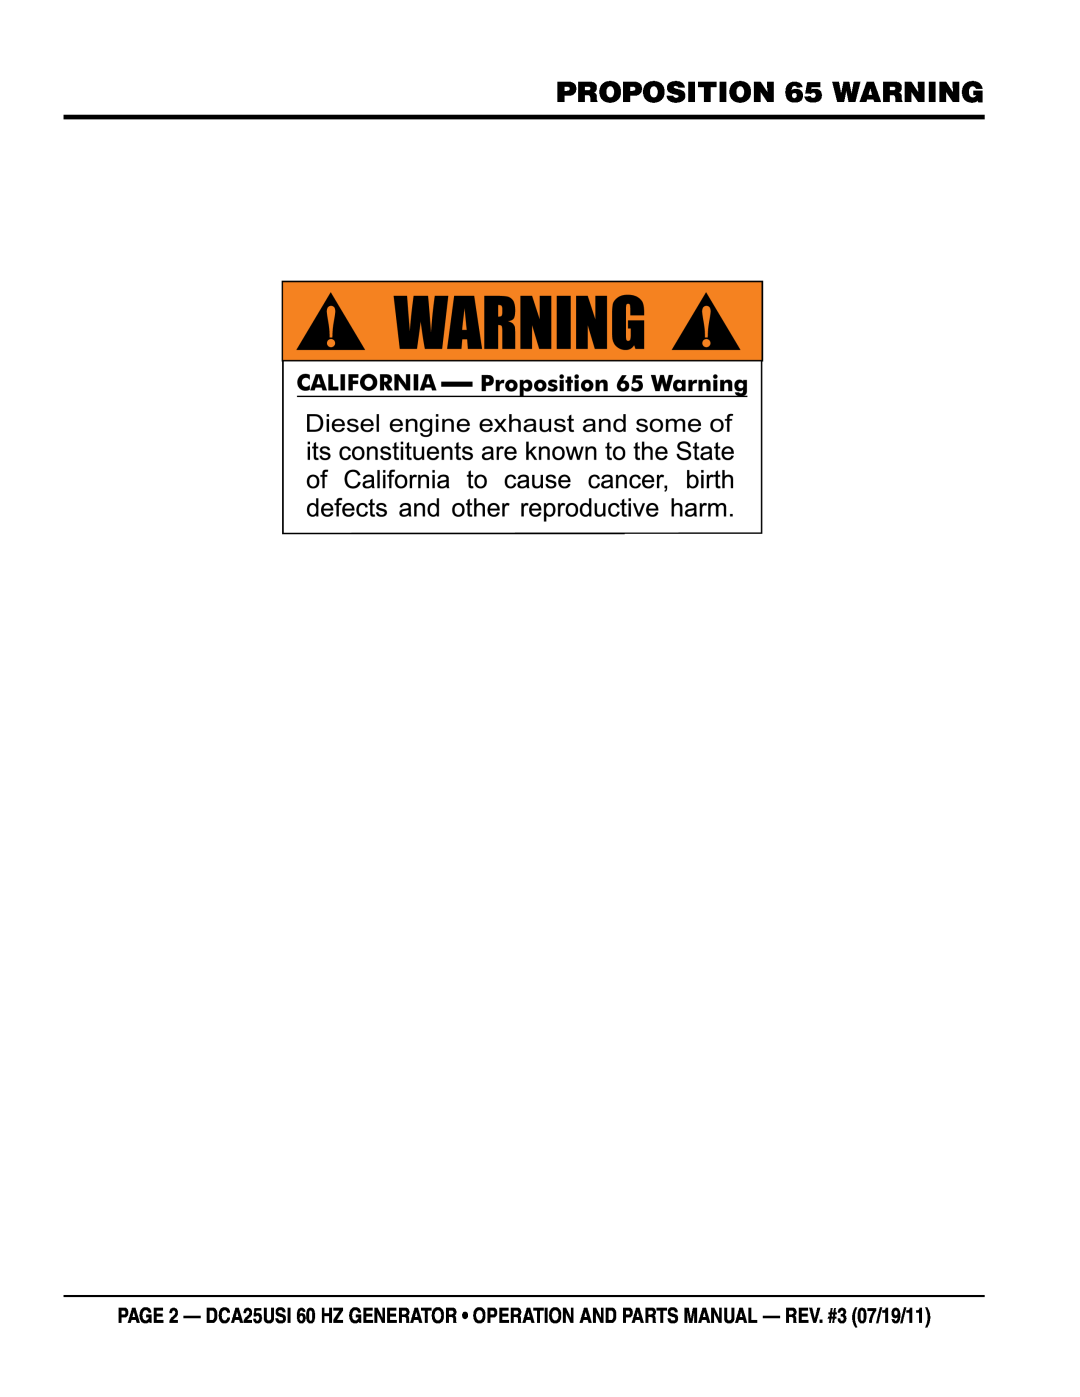 Multiquip DCA25USI manual proposition 65 warning, Diesel engine exhaust and some of 